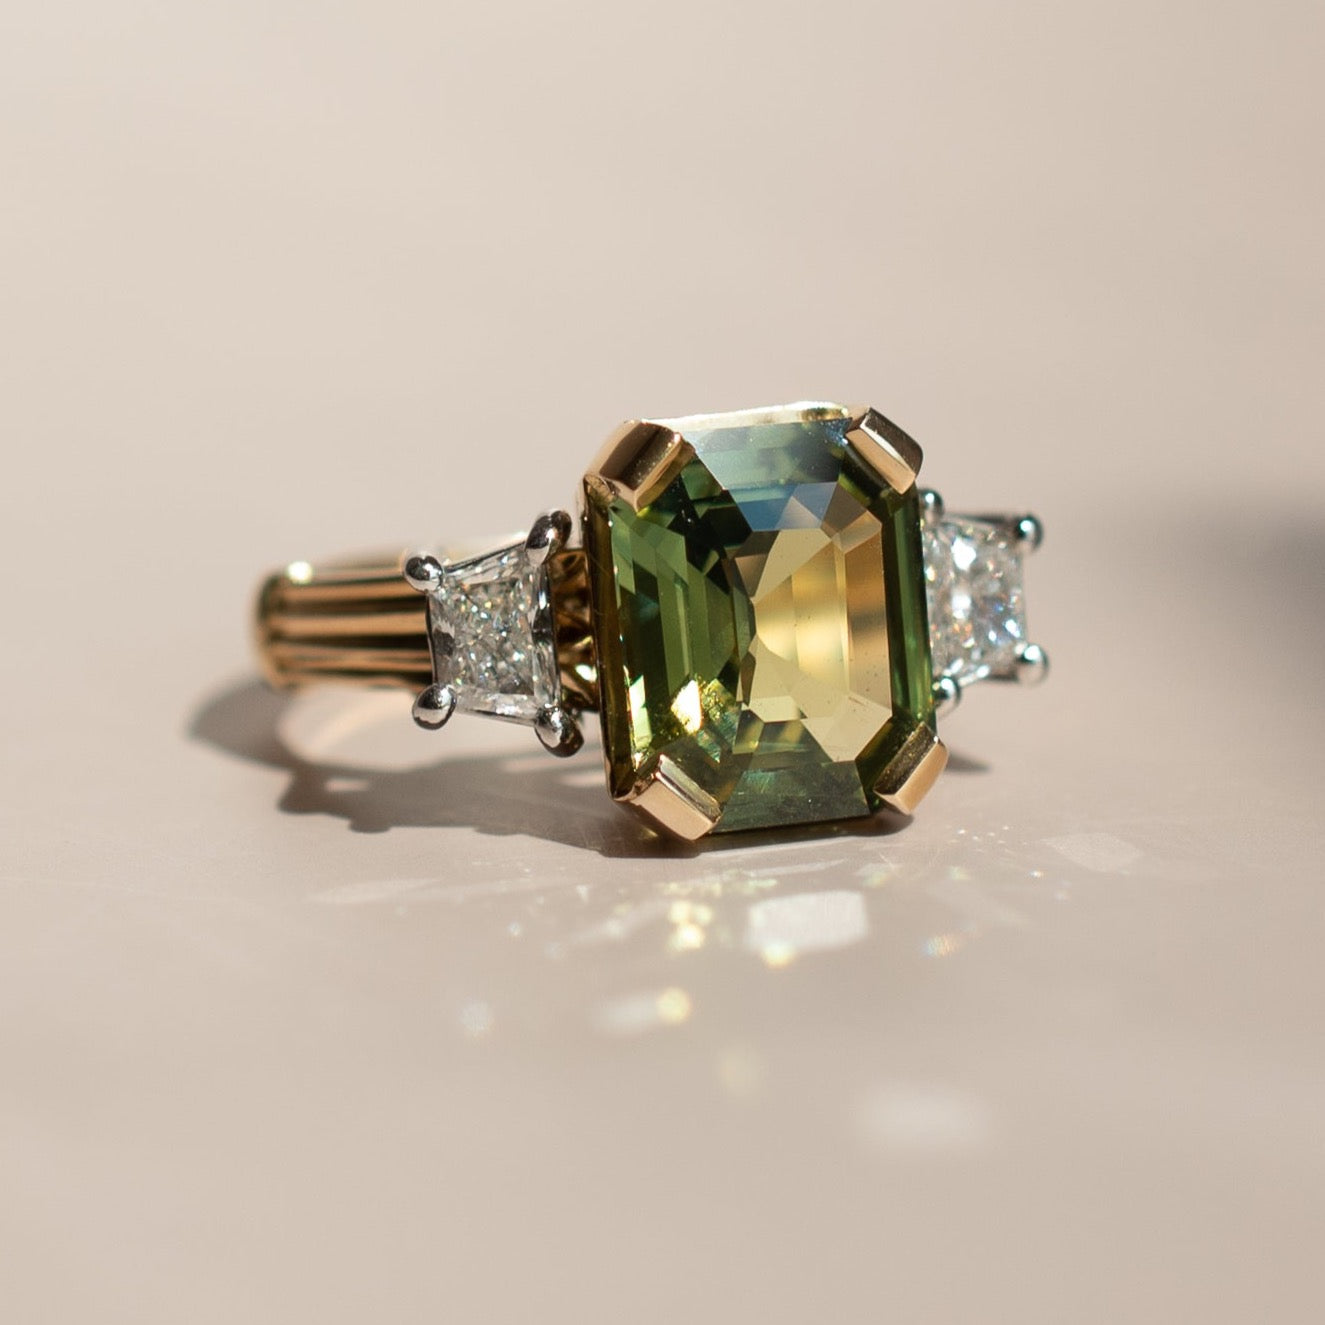 The Green Sapphire Ring